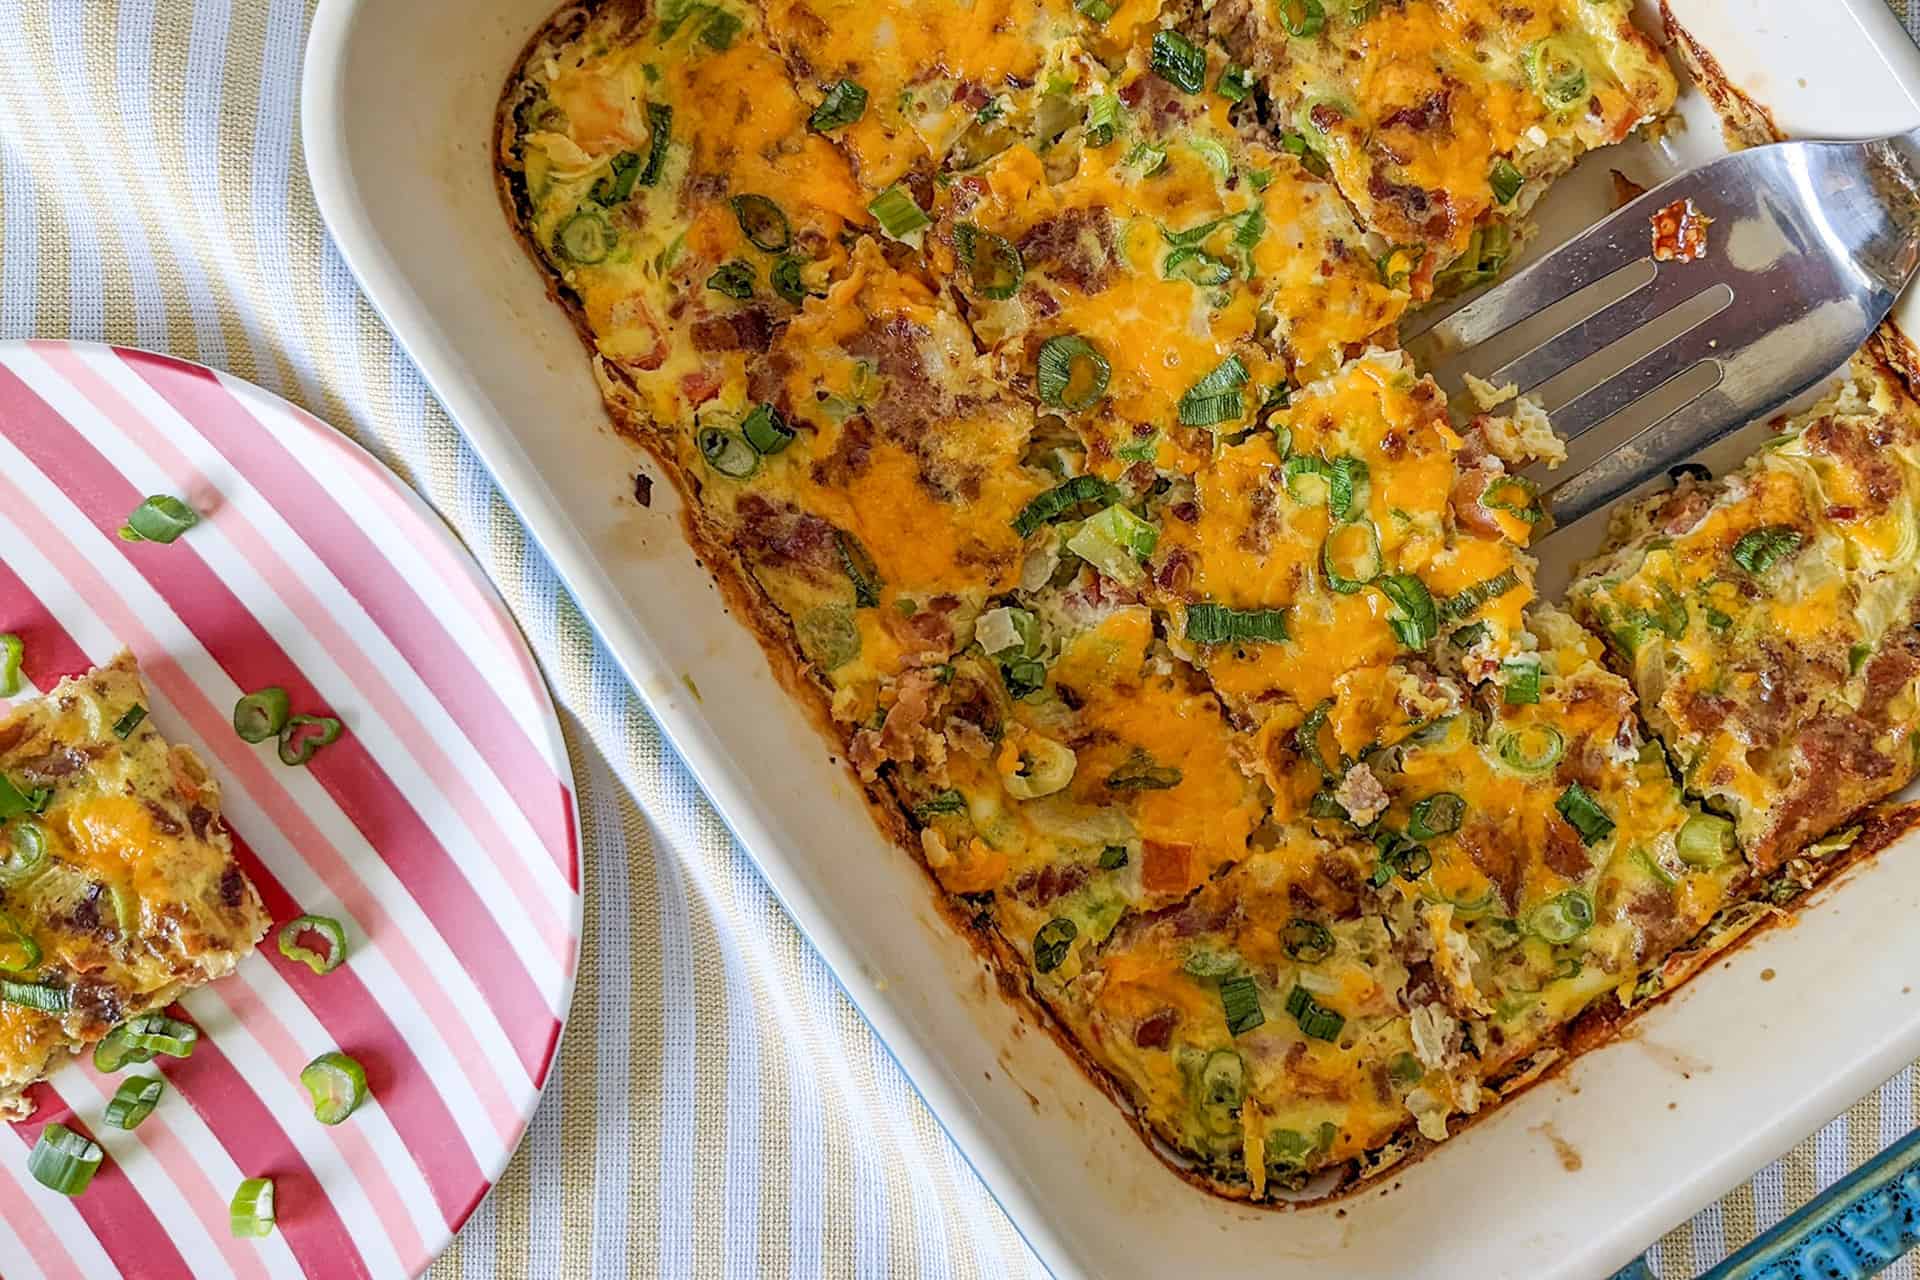 An egg casserole for Easter breakfast holiday